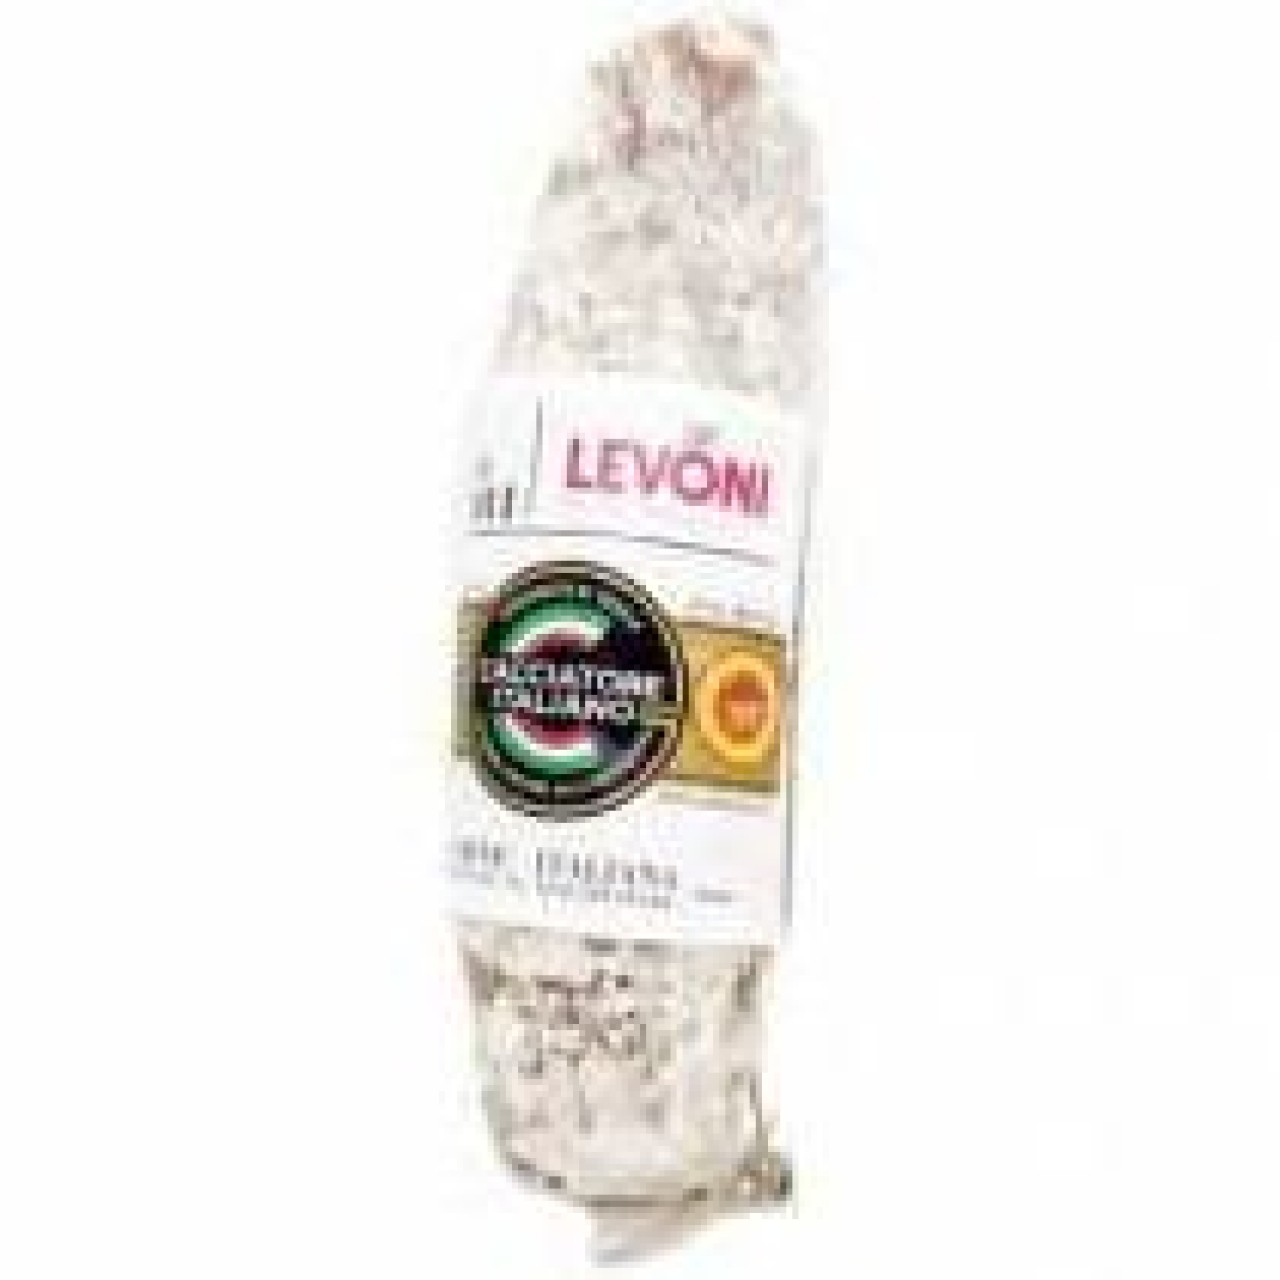 SALAME UNGHERESE LEVONI